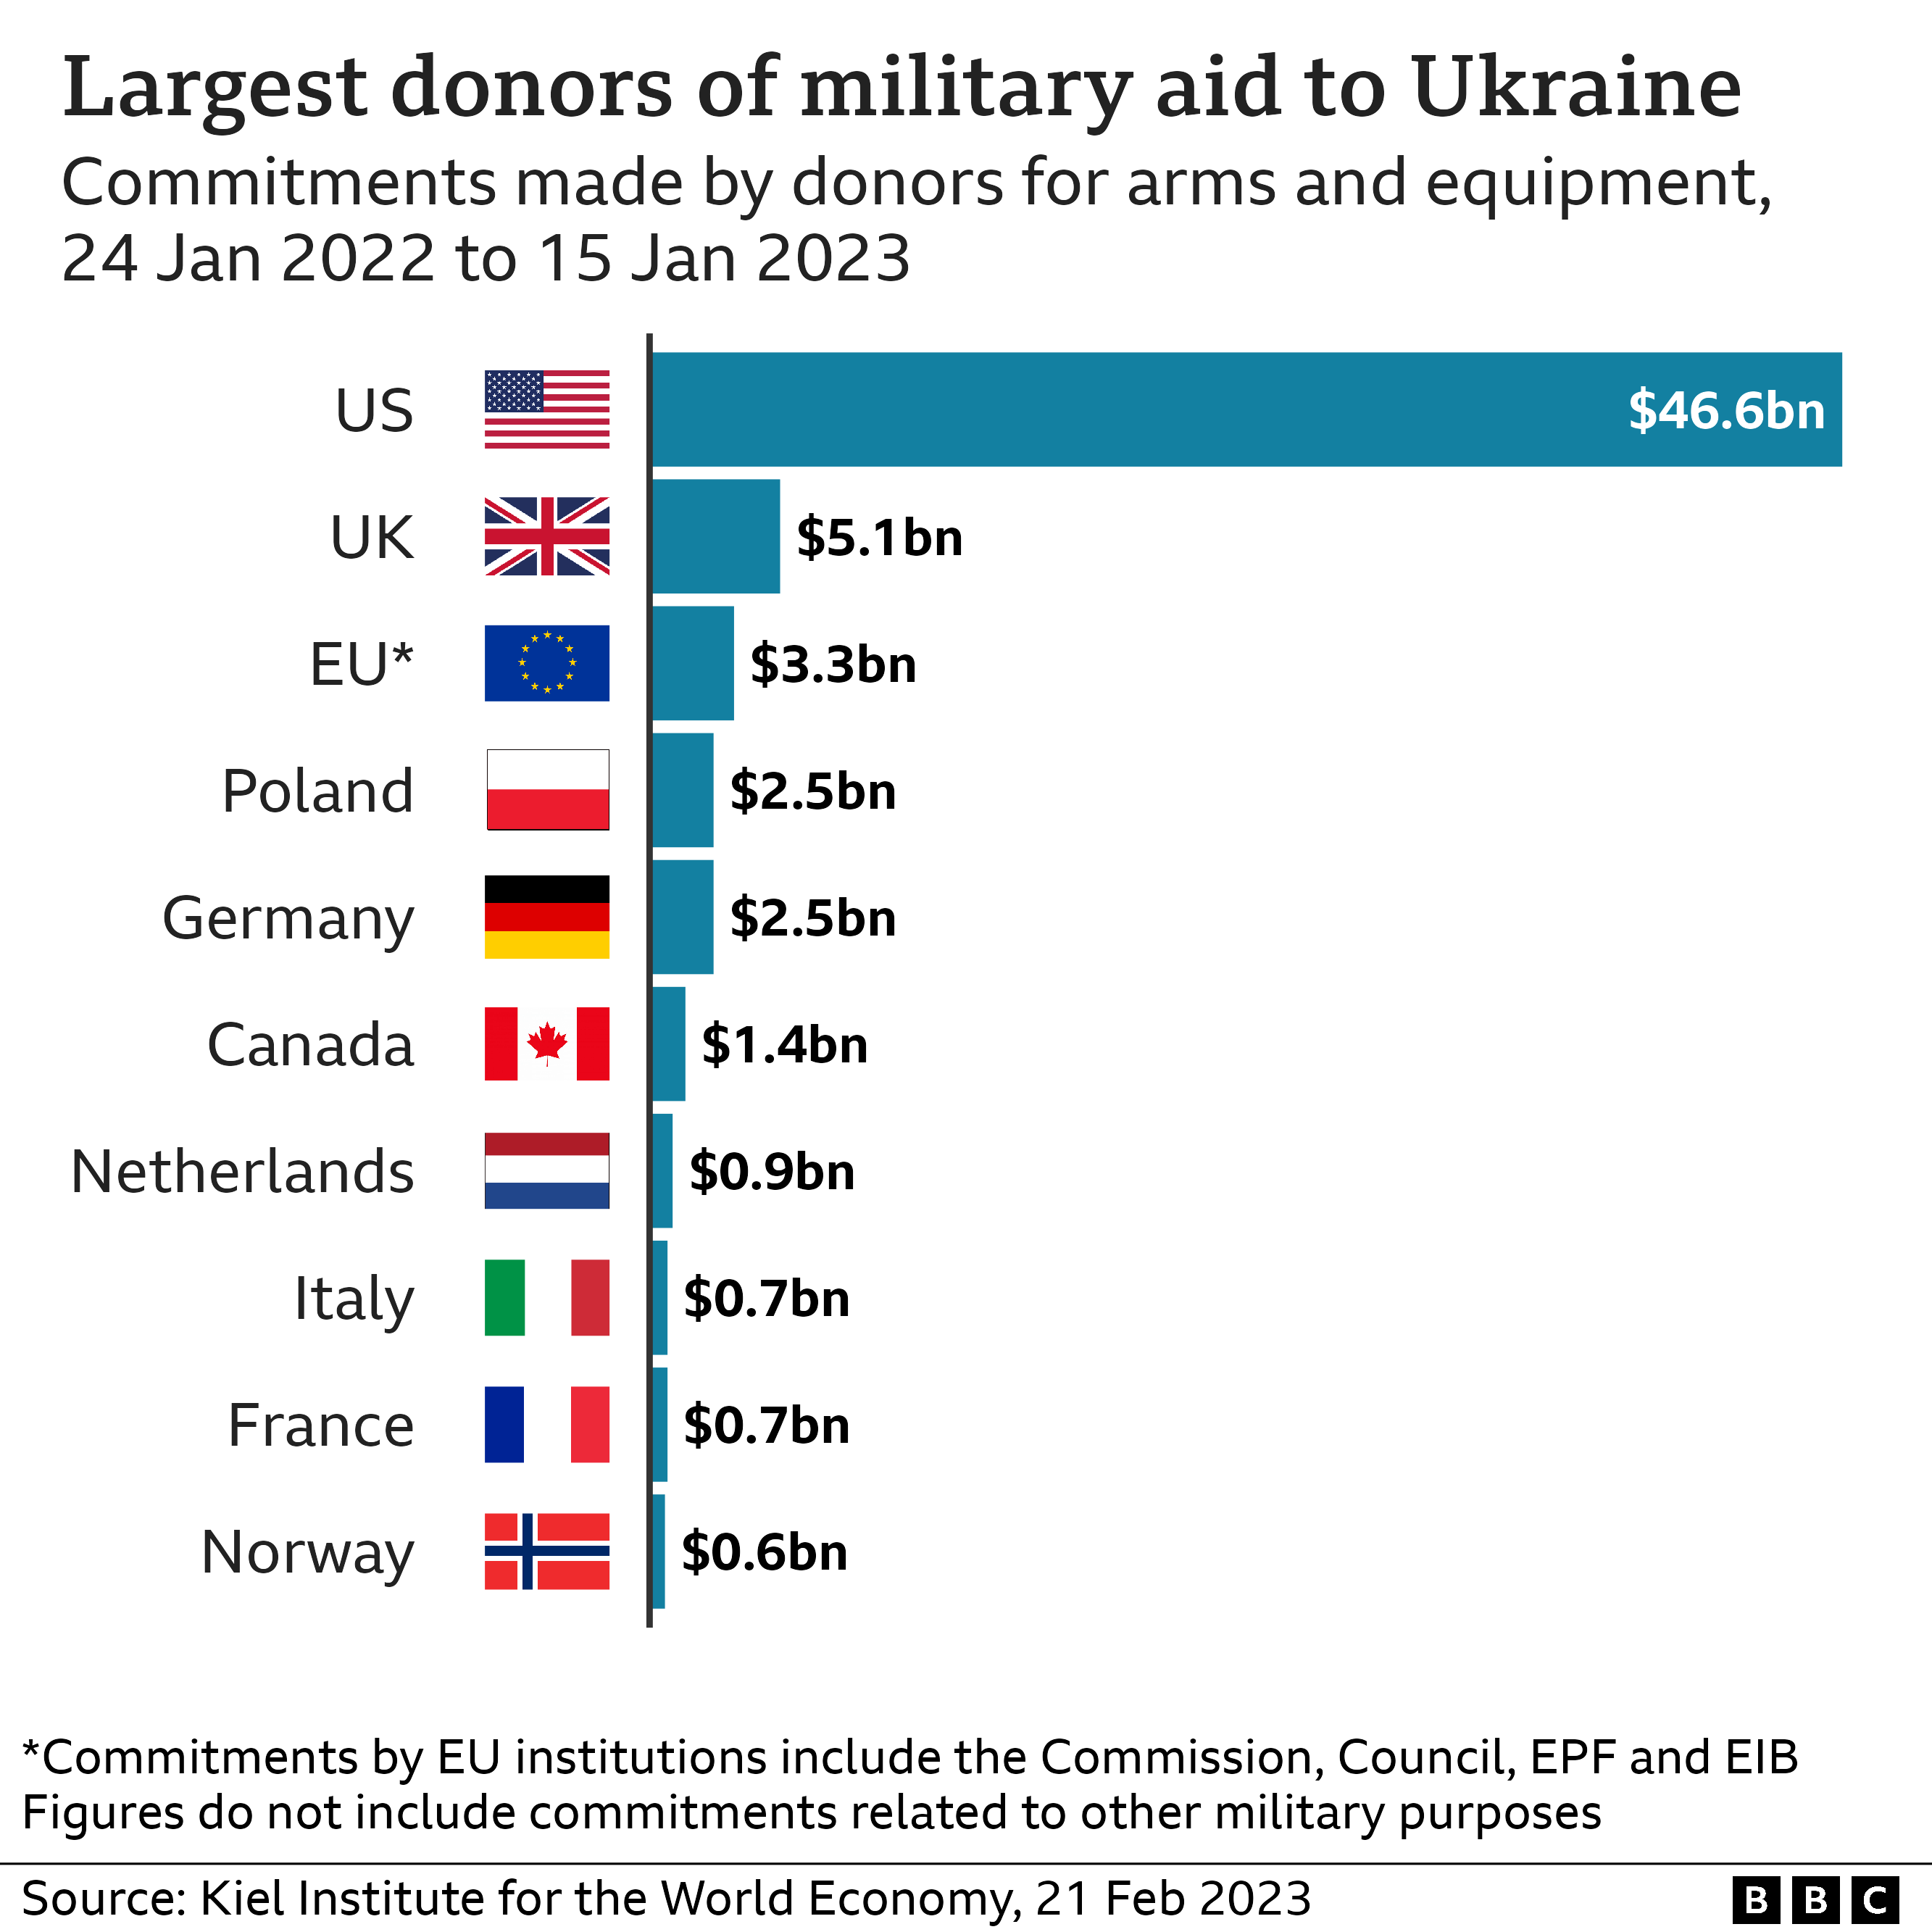 Chart showing largest donors of military aid to Ukraine by country.